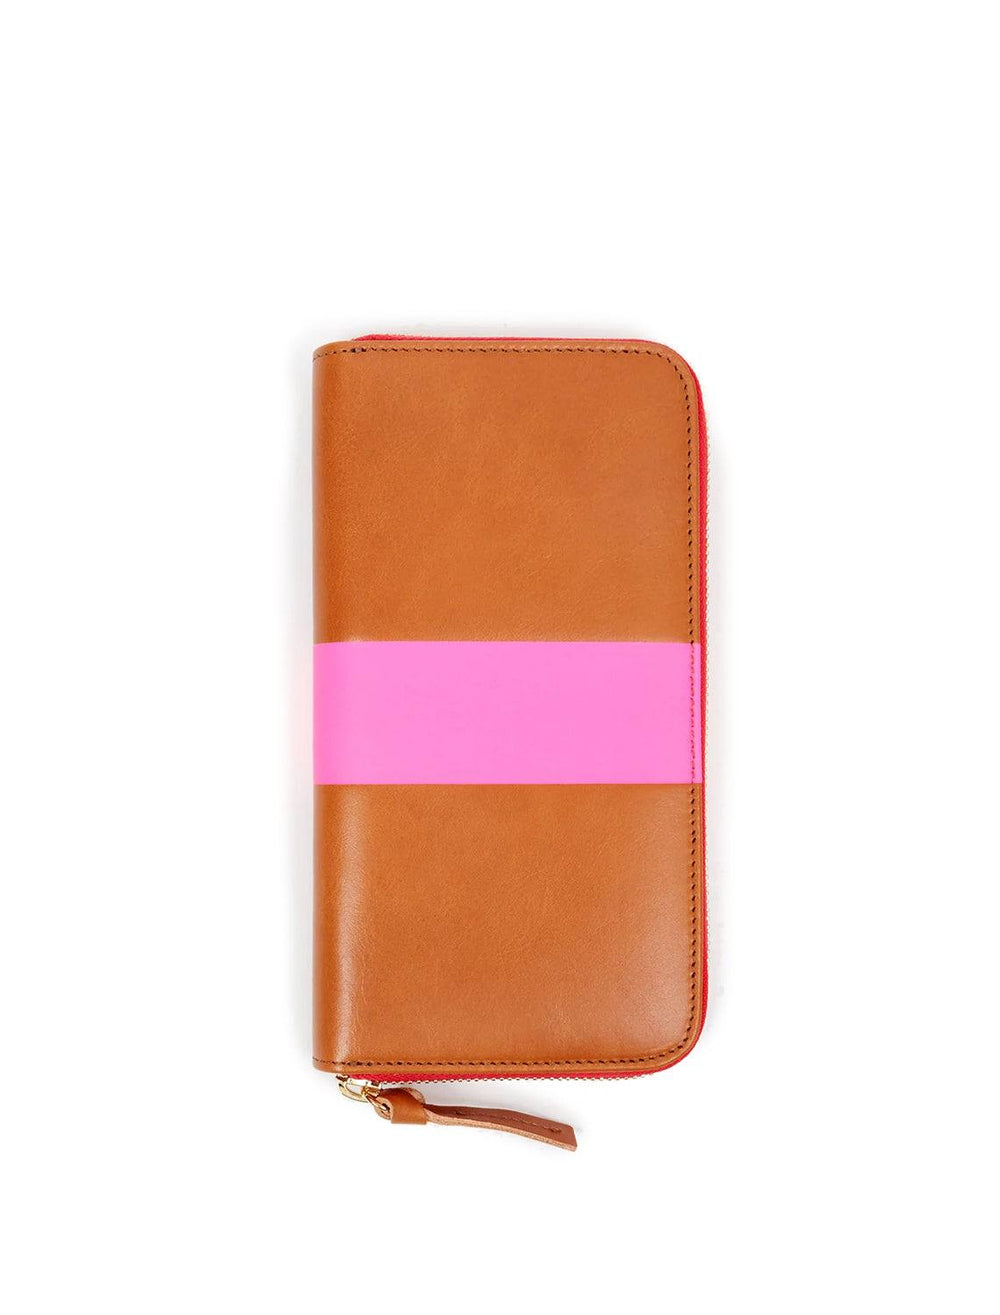 Overhead view of Clare V.'s zip wallet in natural with neon pink stripe.